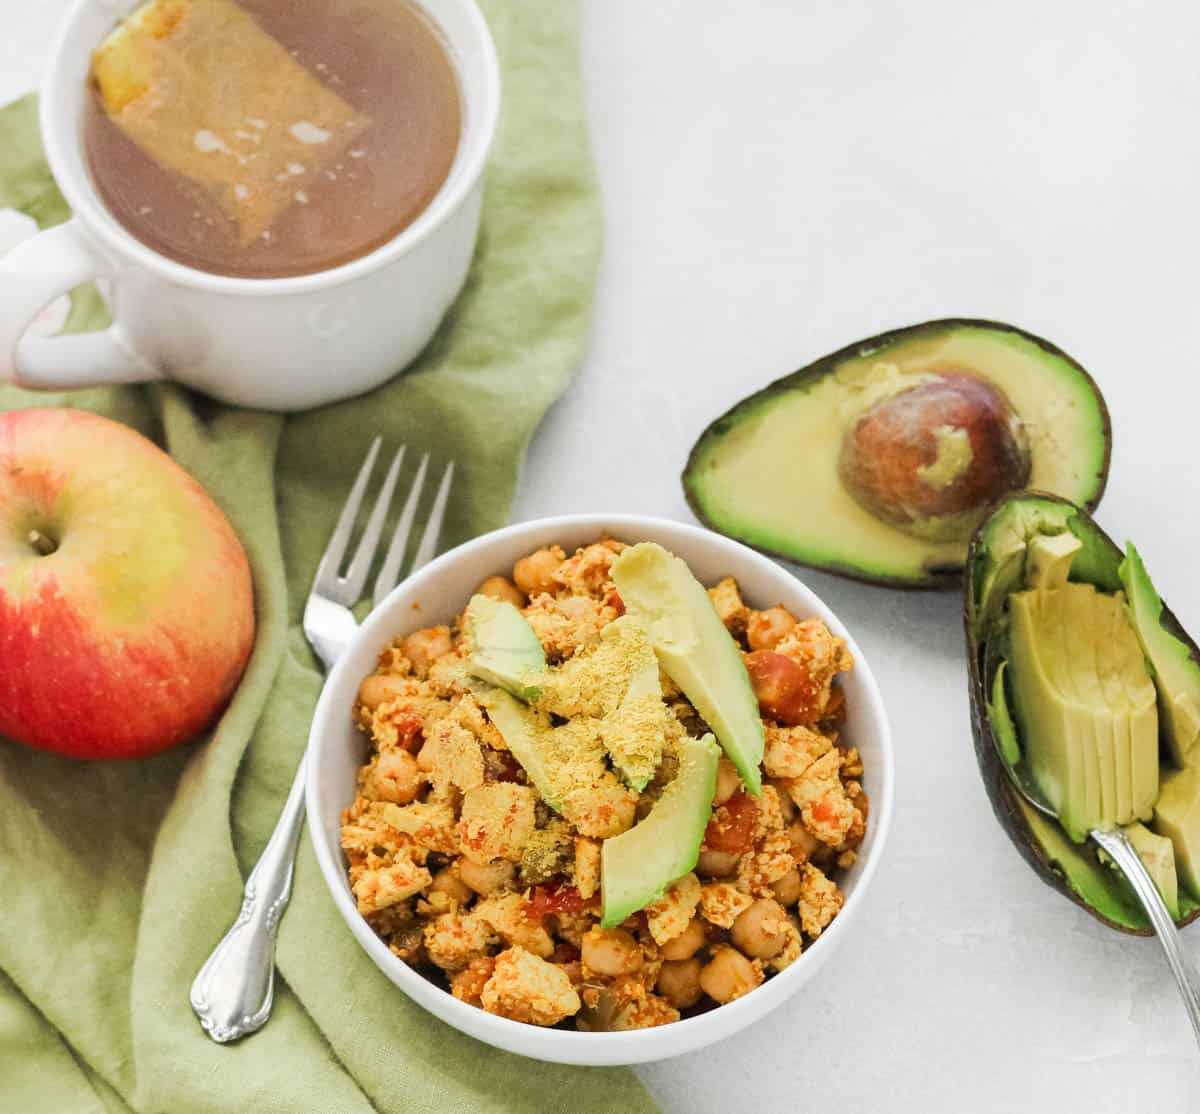 southwest tofu scramble in a bowl topped with avocado slices and nutritional yeast next to a cup of tea, an apple, a fork, and an avocado.